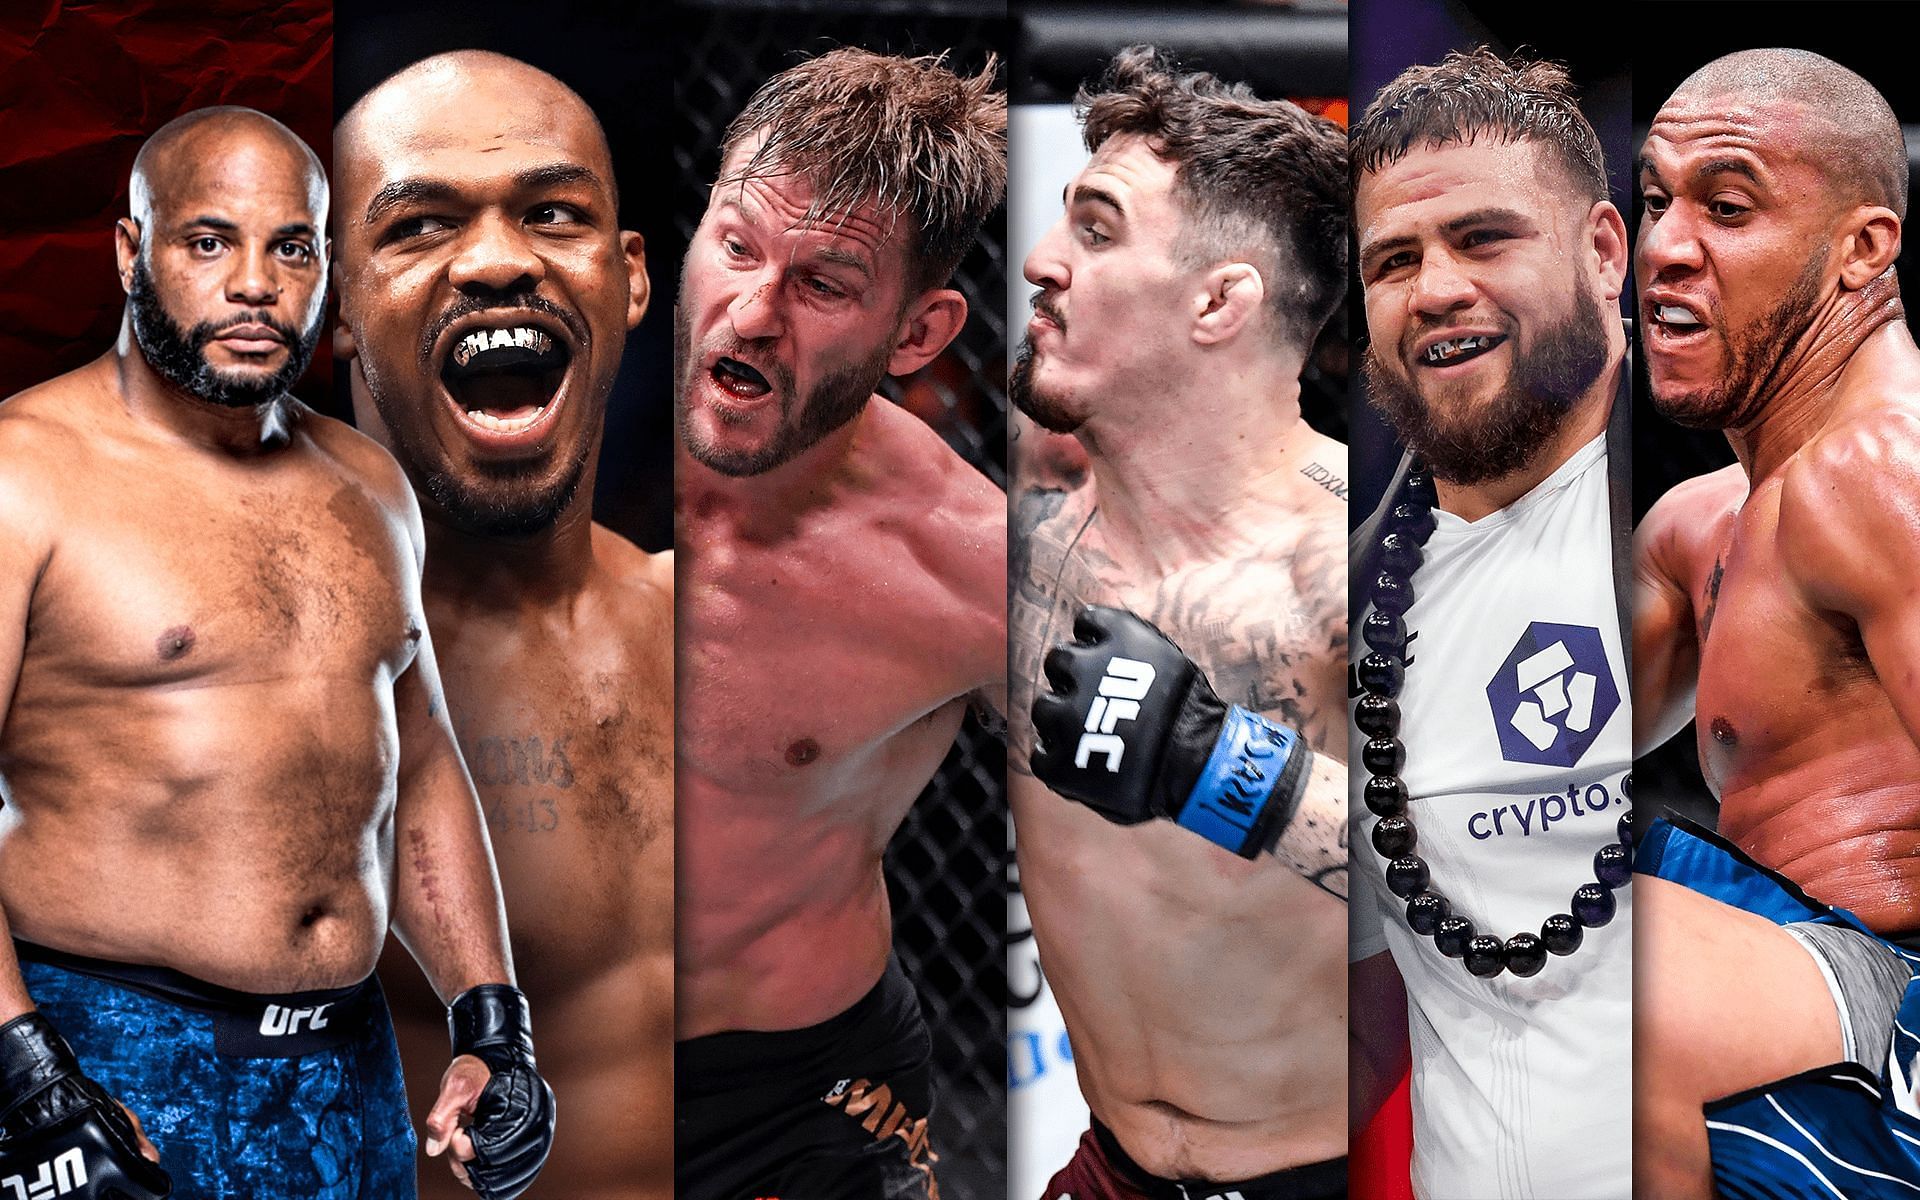 Daniel Cormier names matchups UFC could book in the heavyweight division this year [Image credits: Cormier image - ufc.com; Other images - Getty]